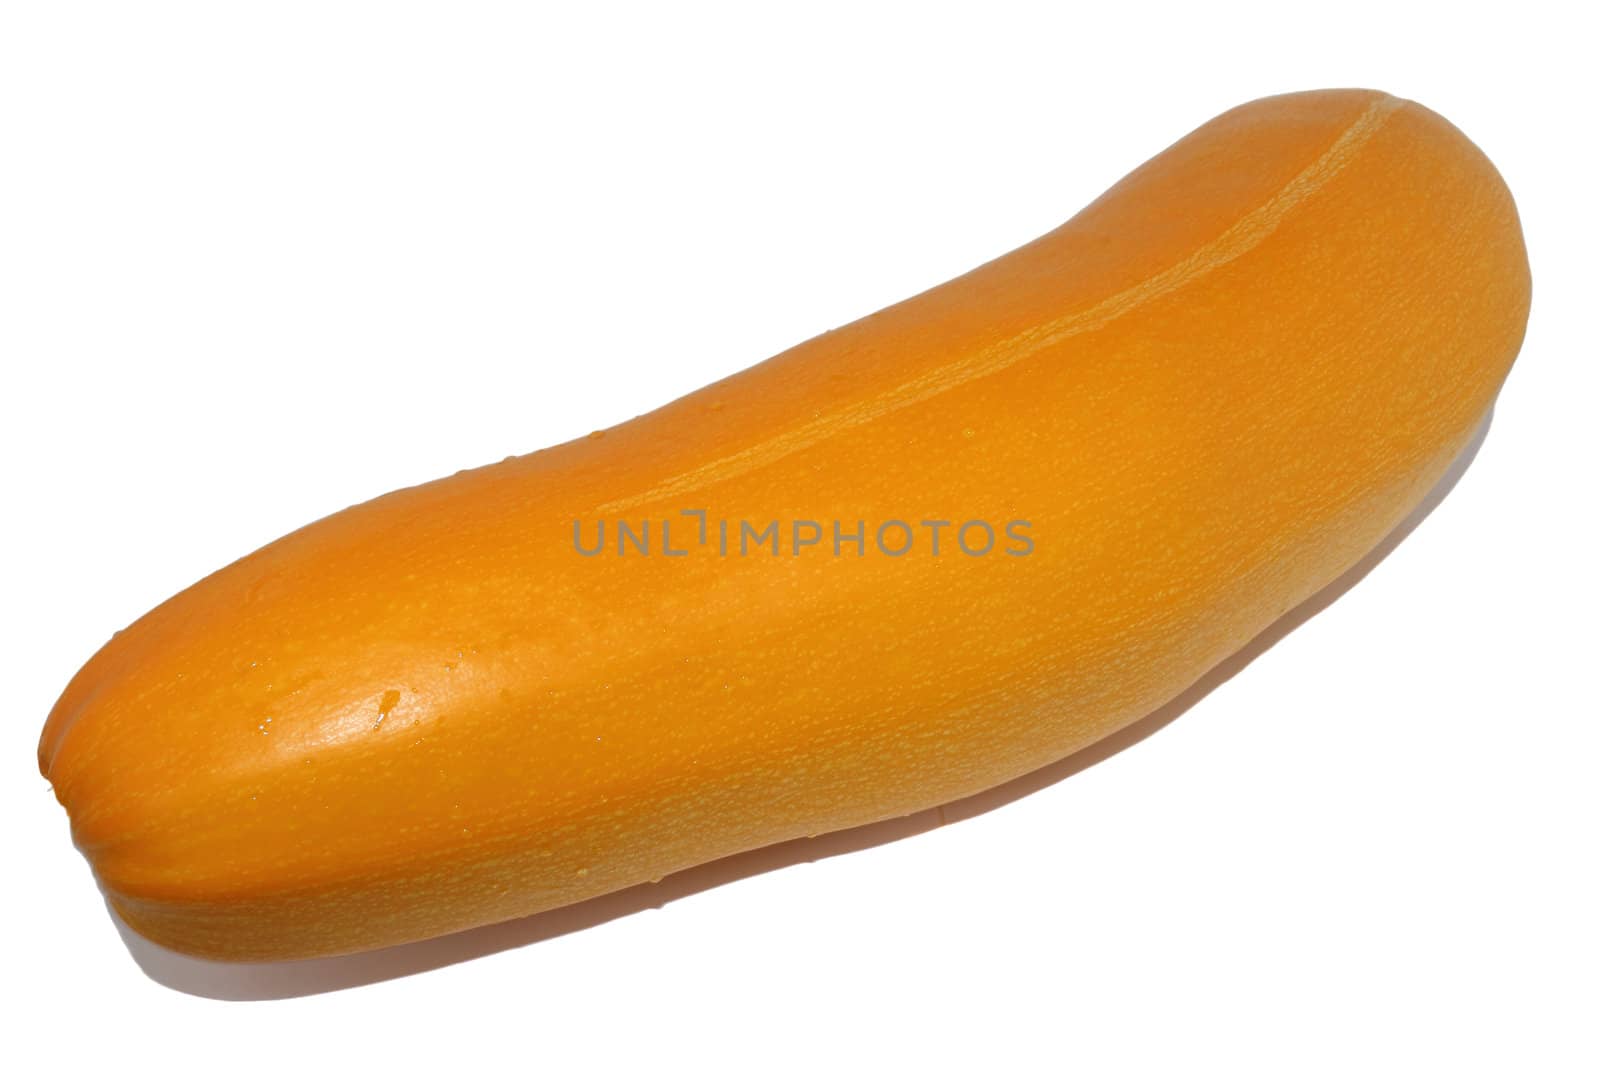 Vegetable marrow of yellow color of a sort "banana" on a white background